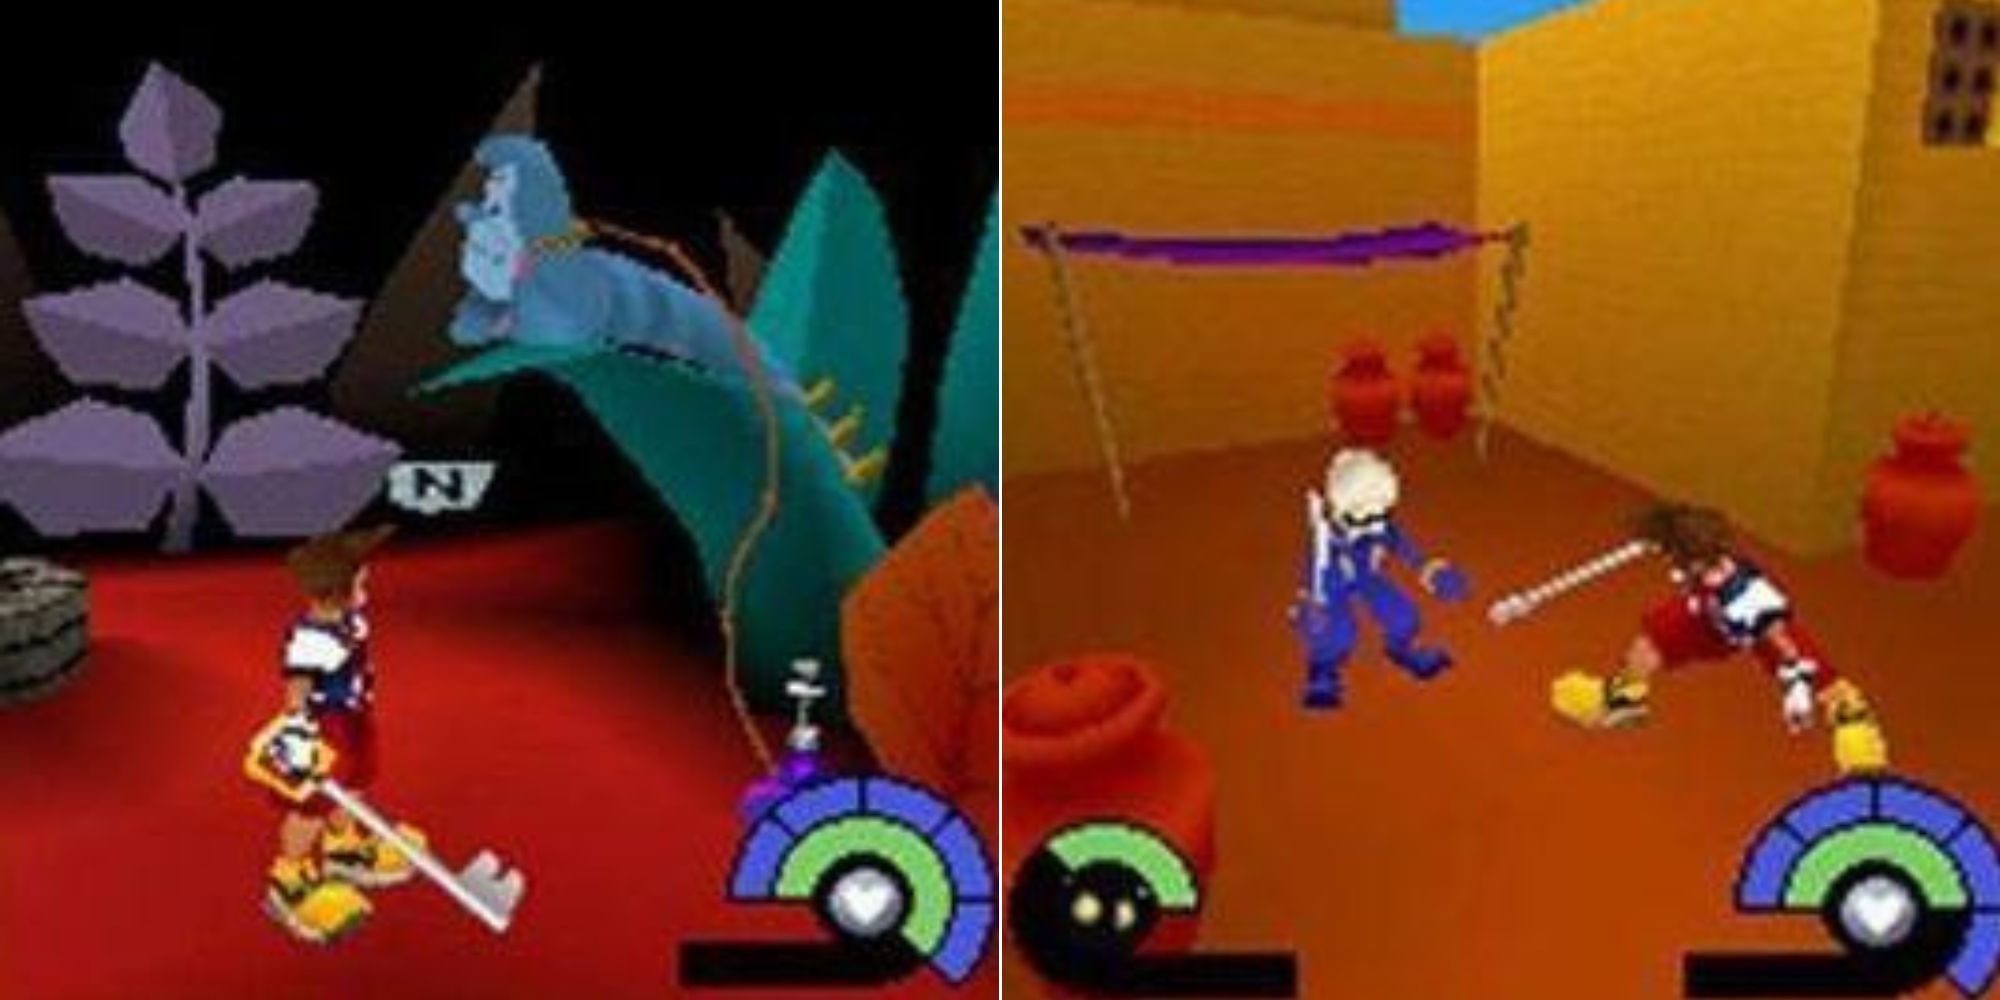 Sora meets the Caterpillar in Wonderland and attacks a Heartless in Agrabah.